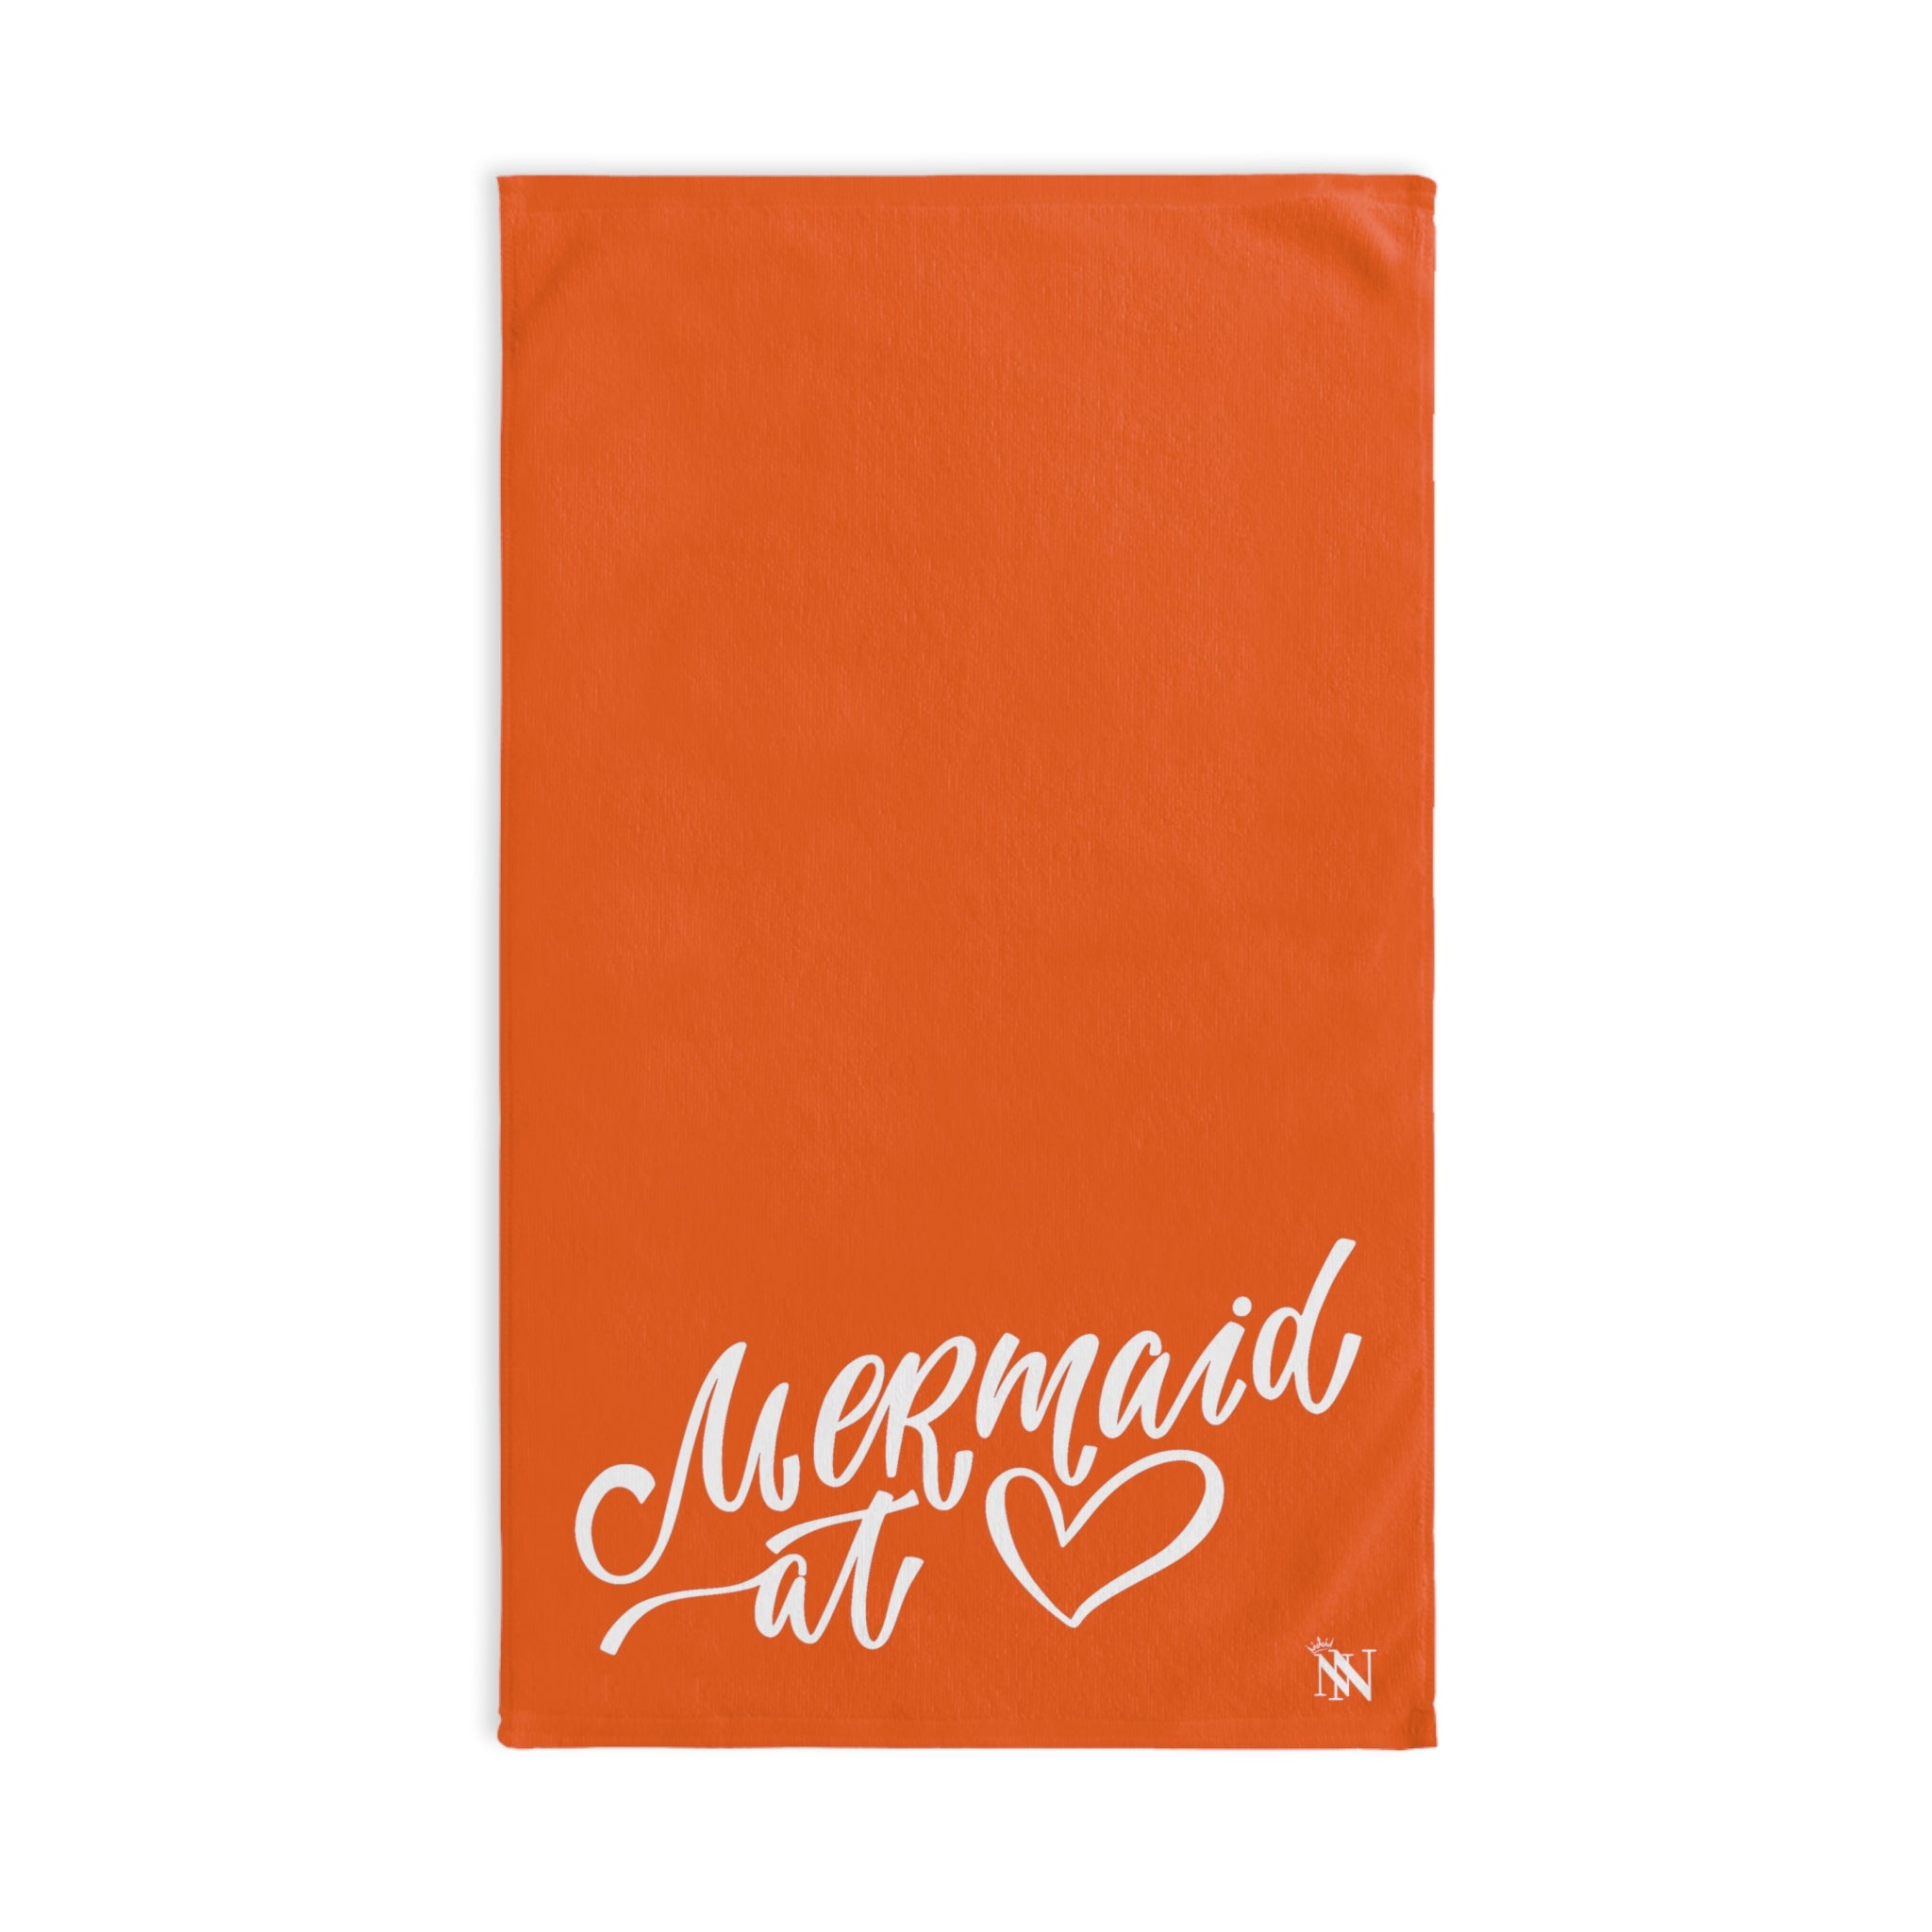 Mermaid At Heart Orange | Funny Gifts for Men - Gifts for Him - Birthday Gifts for Men, Him, Husband, Boyfriend, New Couple Gifts, Fathers & Valentines Day Gifts, Hand Towels NECTAR NAPKINS